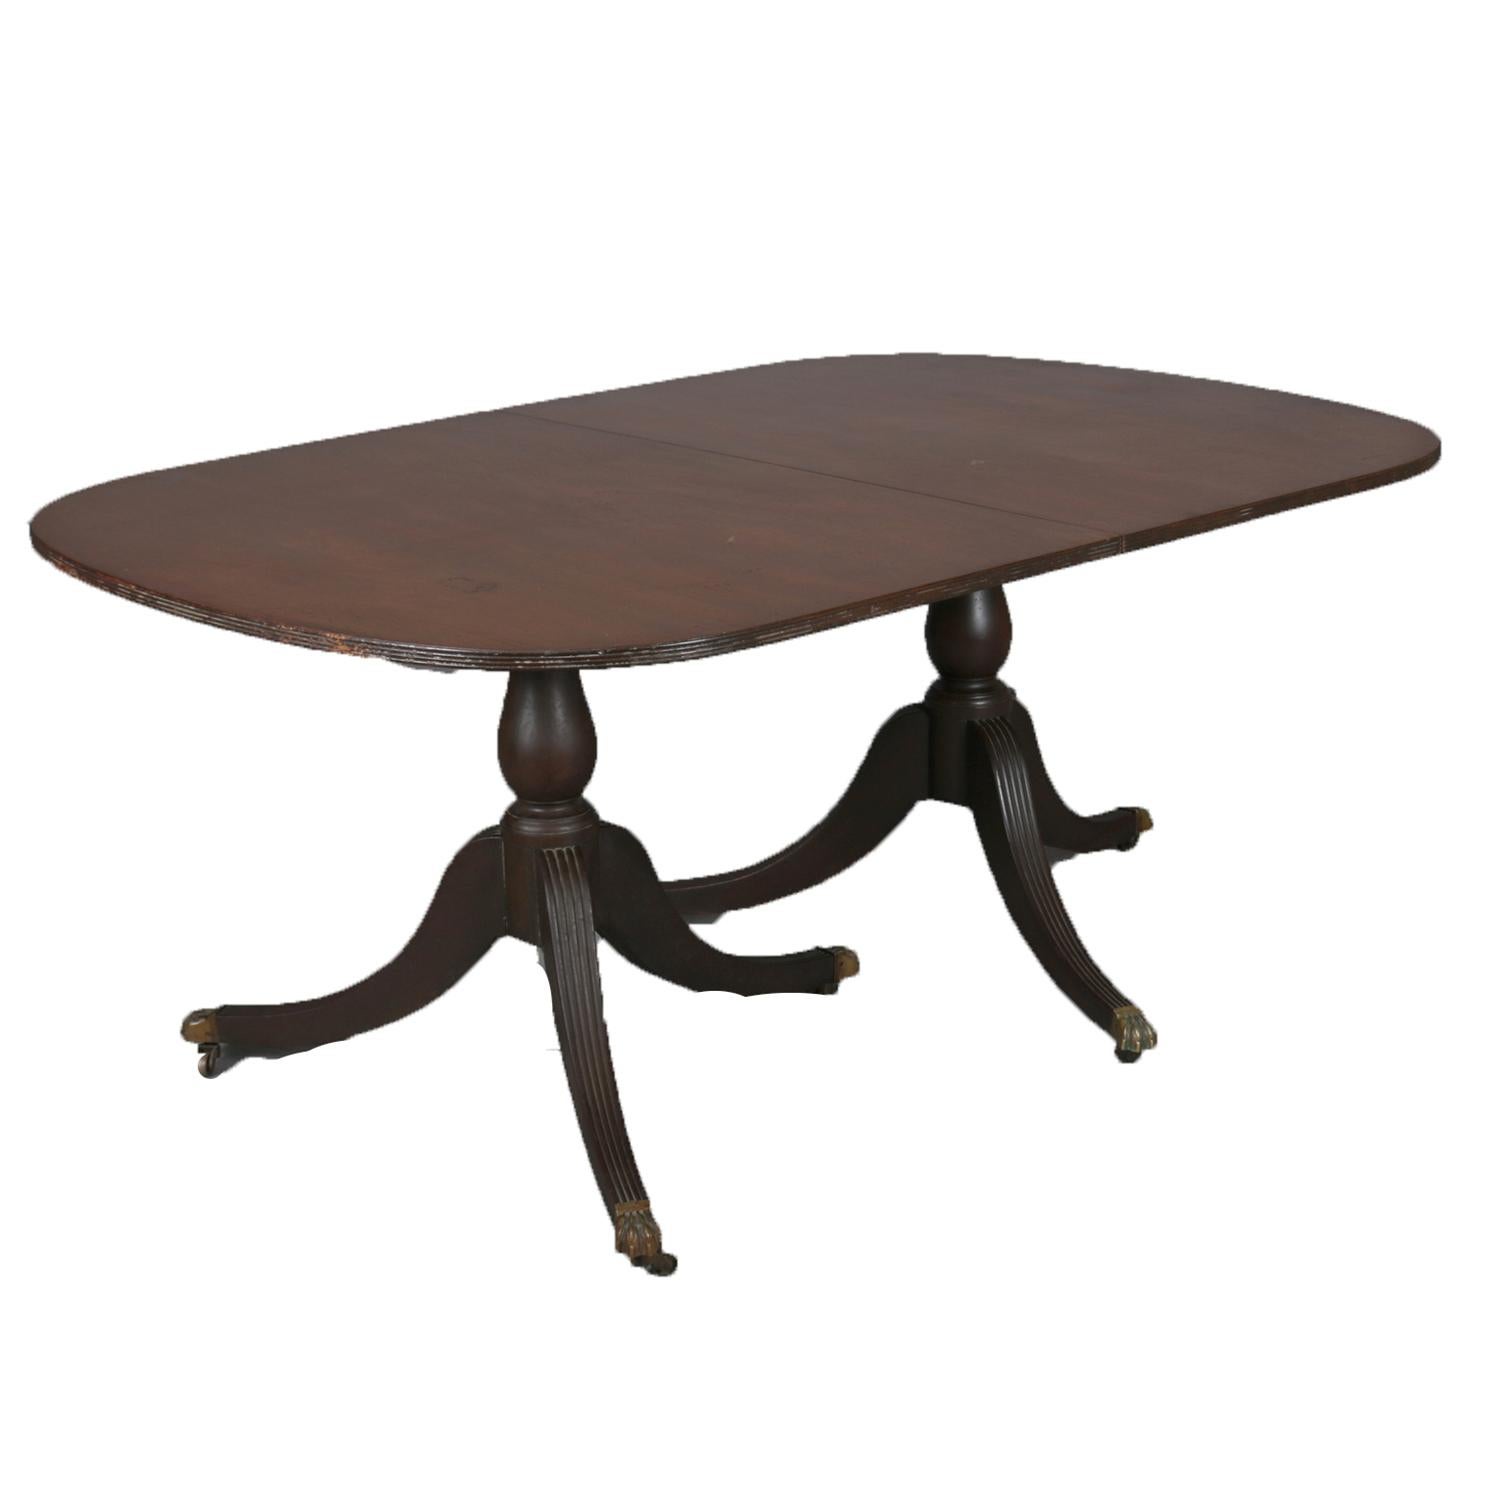 American Antique Federal Triple Pedestal Mahogany Banquet Table with 2 Leaves, circa 1890